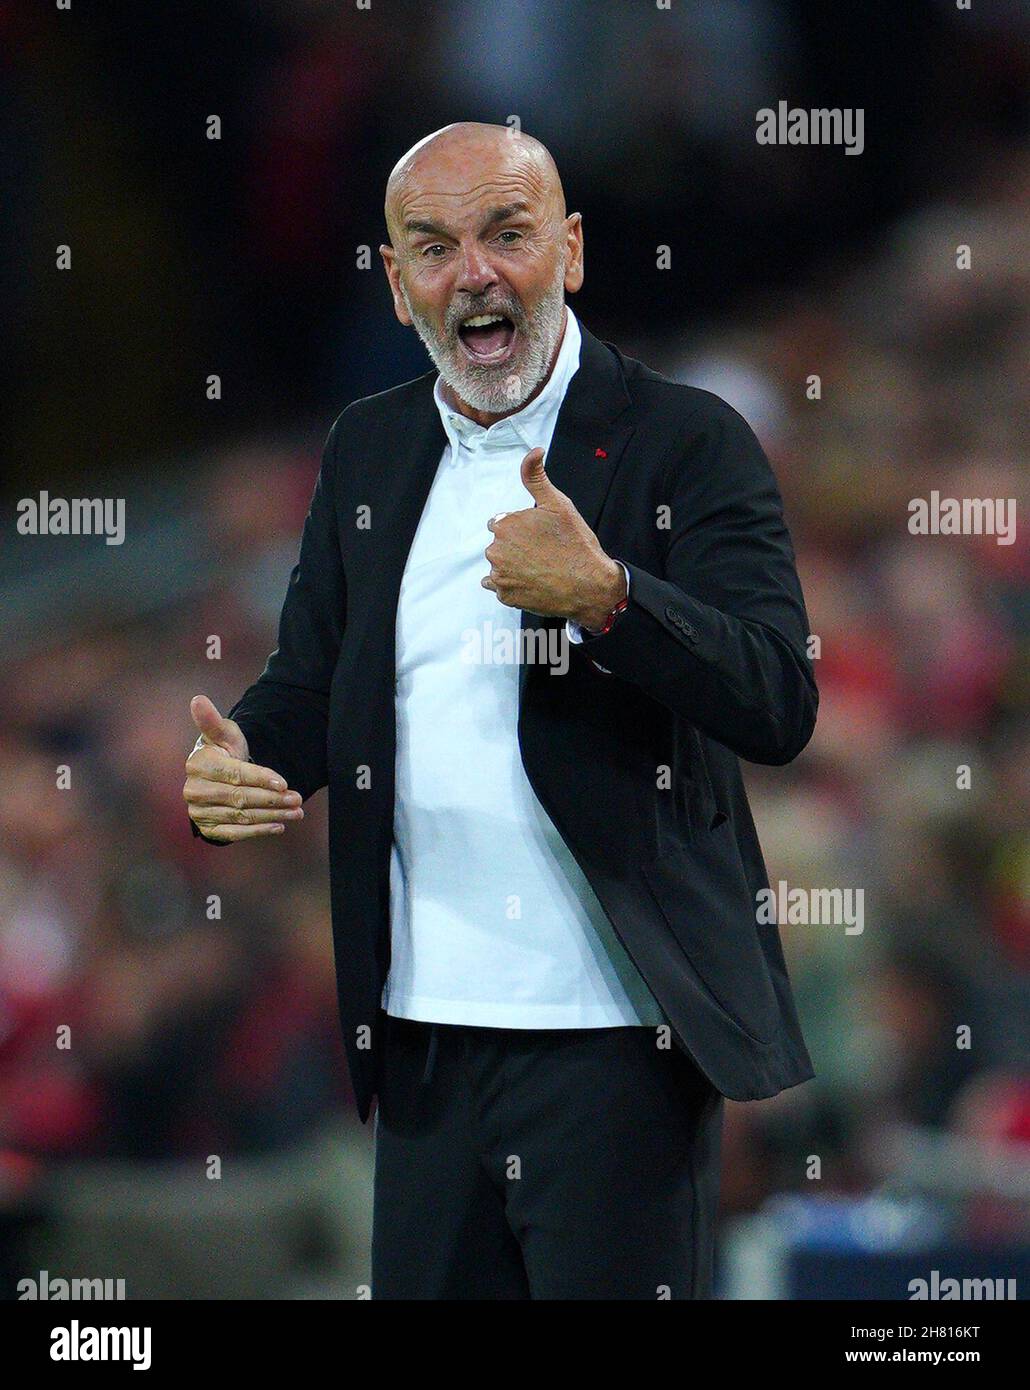 File photo dated 15-09-2021 of AC Milan manager Stefano Pioli shouts on the  touchline during the UEFA Champions League, Group B match at Anfield,  Liverpool. AC Milan head coach Stefano Pioli has